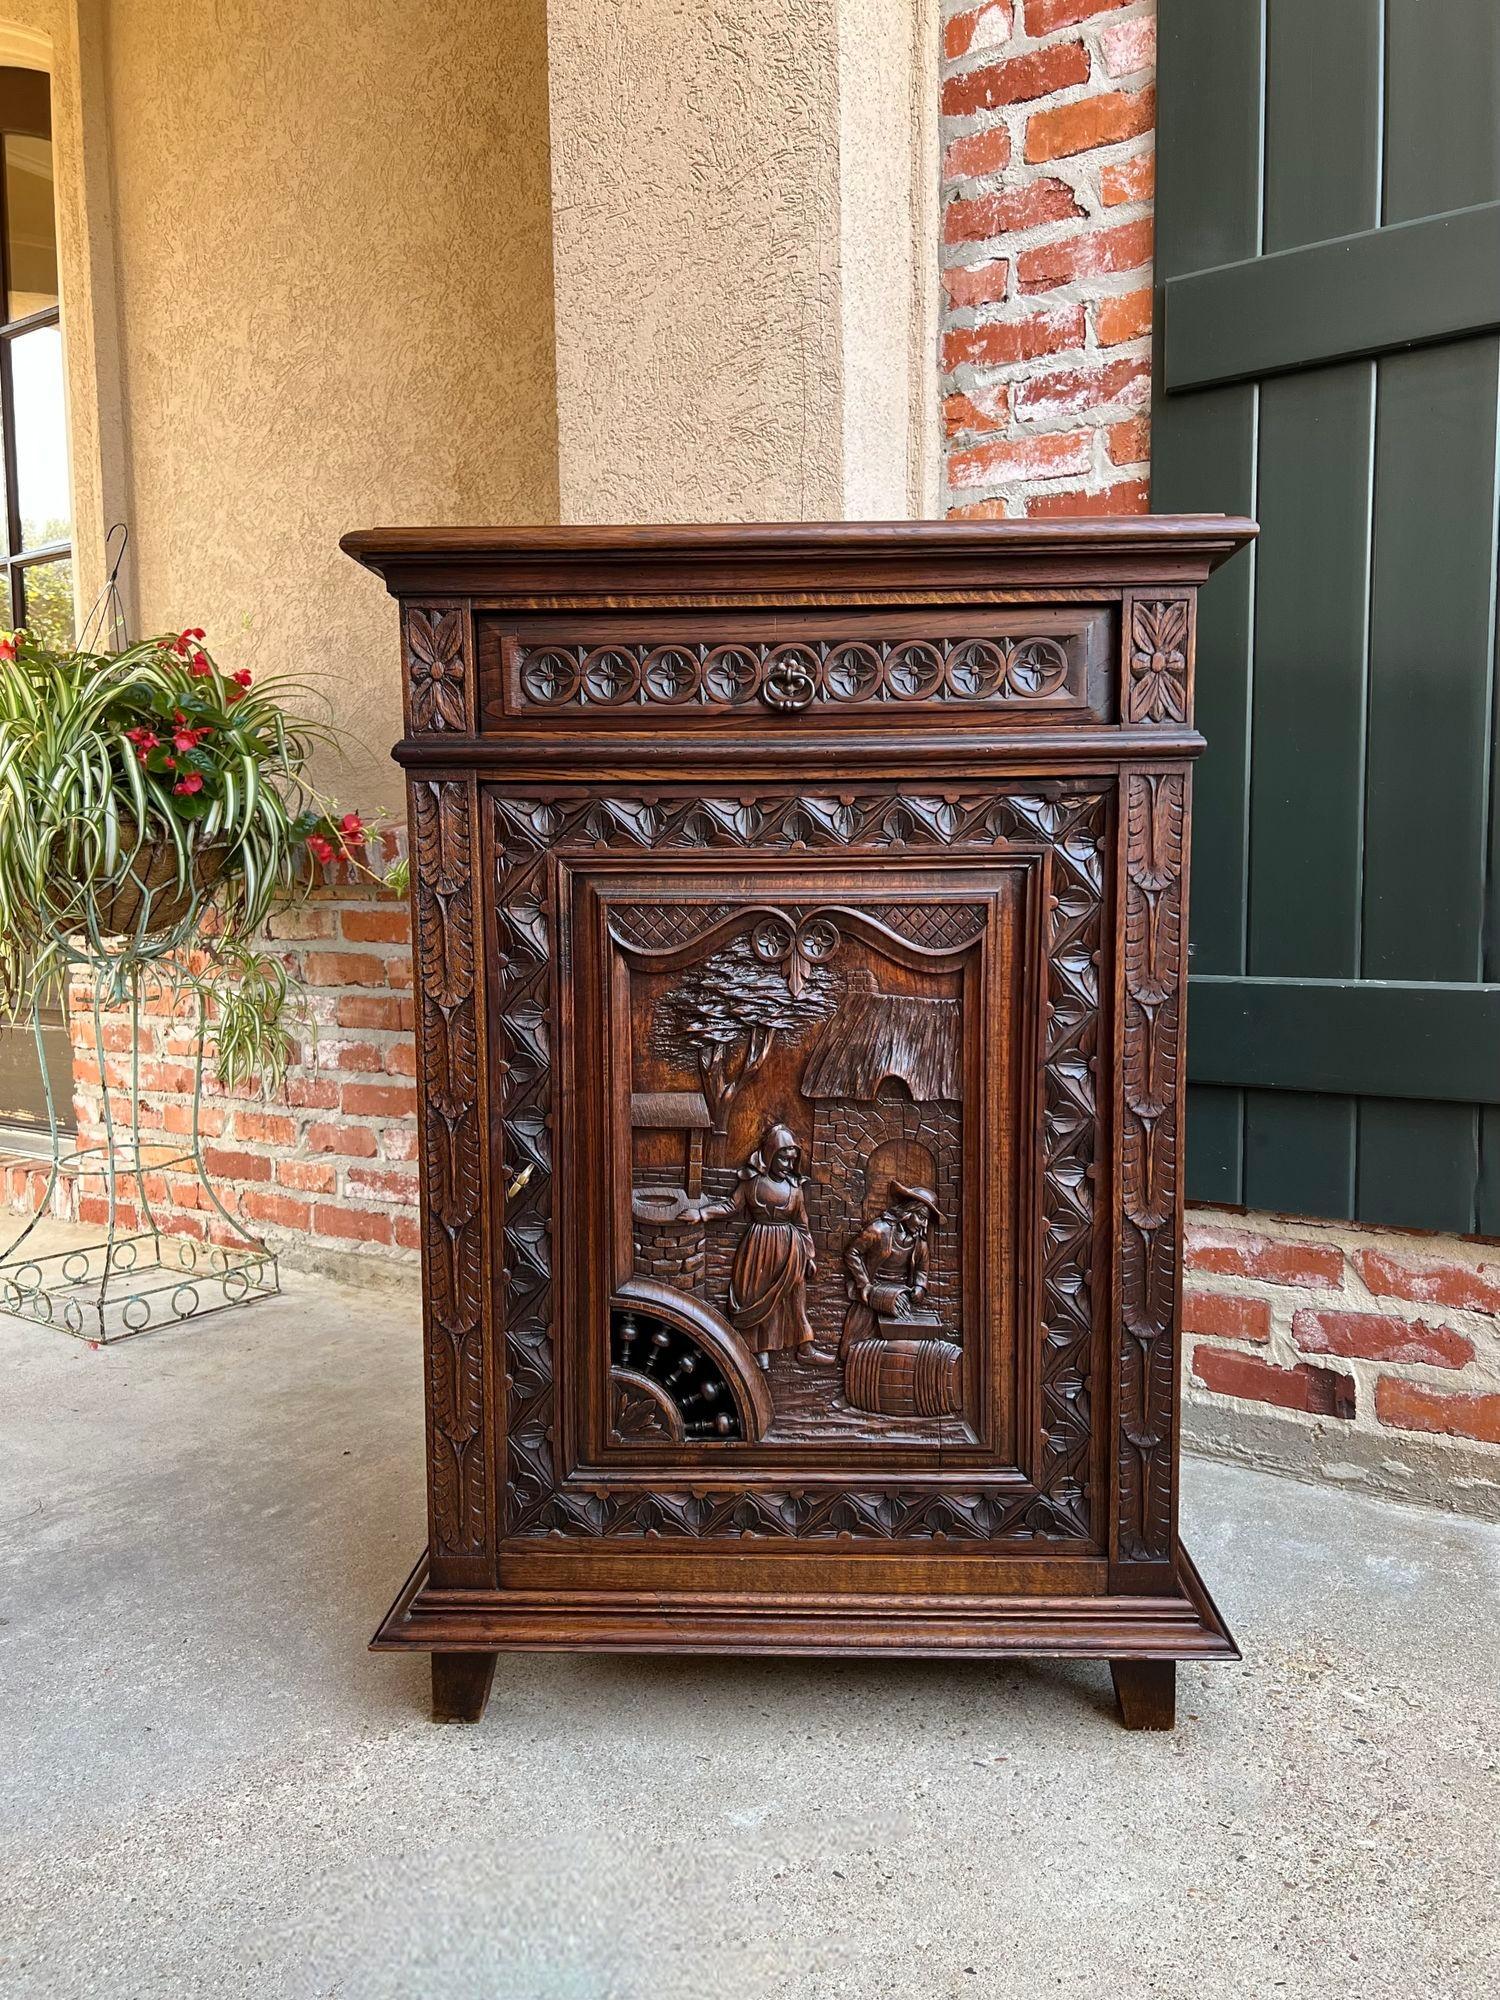 Antique French carved oak cabinet Breton Brittany liqor bar sideboard table.

 Direct from the Brittany region of France, a lovely antique French ‘confiturier’ or jam cabinet. These cabinets are one of our most requested antiques, as they have so